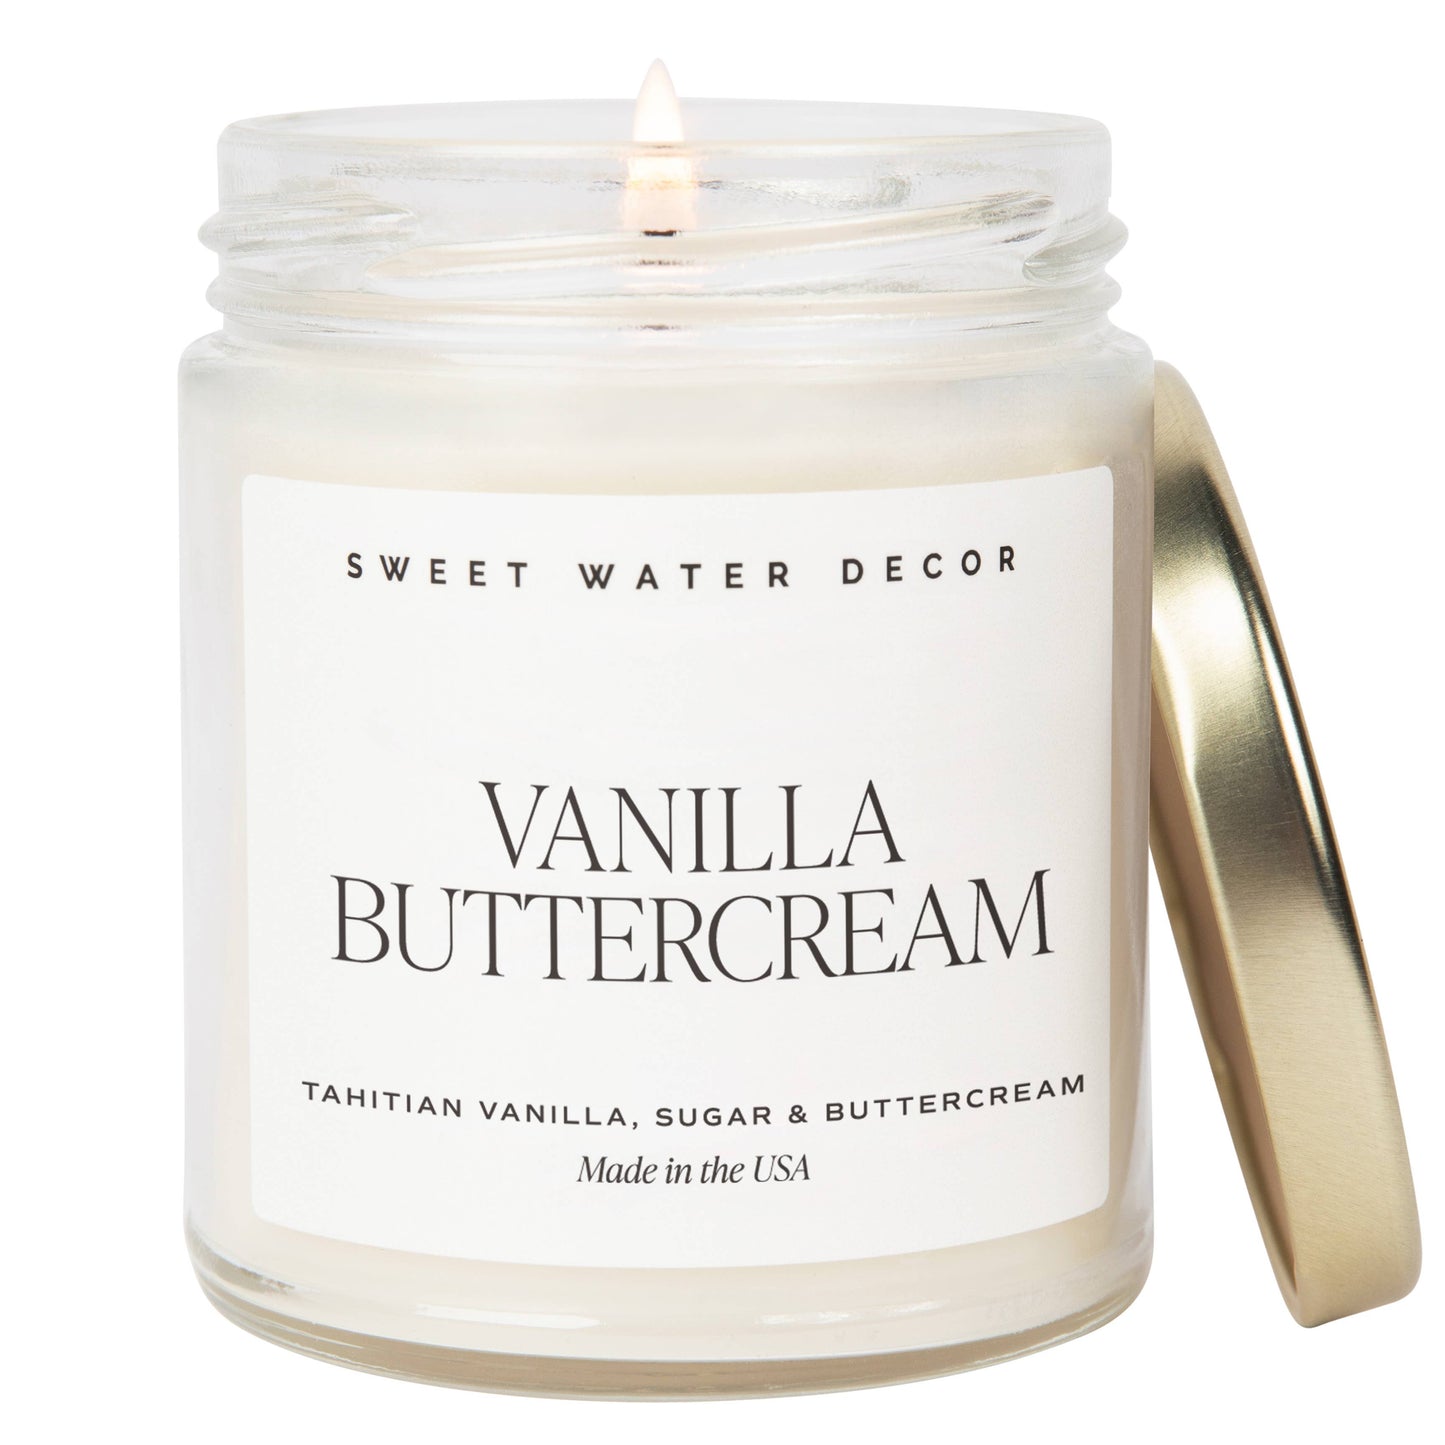 Sweet Water Decor - Vanilla Buttercream 9 oz Soy Candle - Home Decor & Gifts